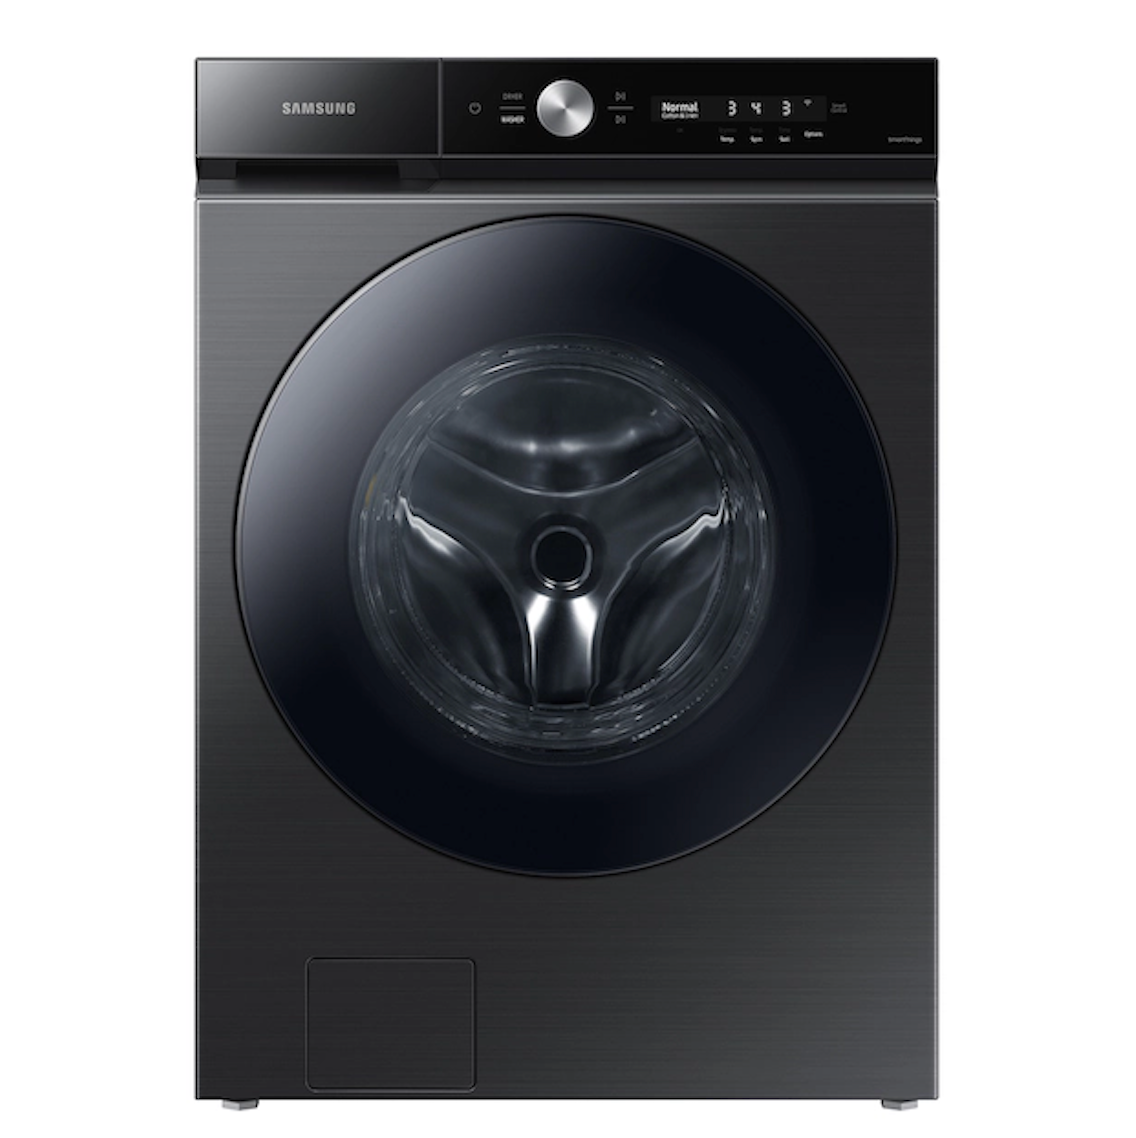 Bespoke 5.3 cu. ft. Ultra Capacity Front Load Washer with Super Speed Wash and AI Smart Dial